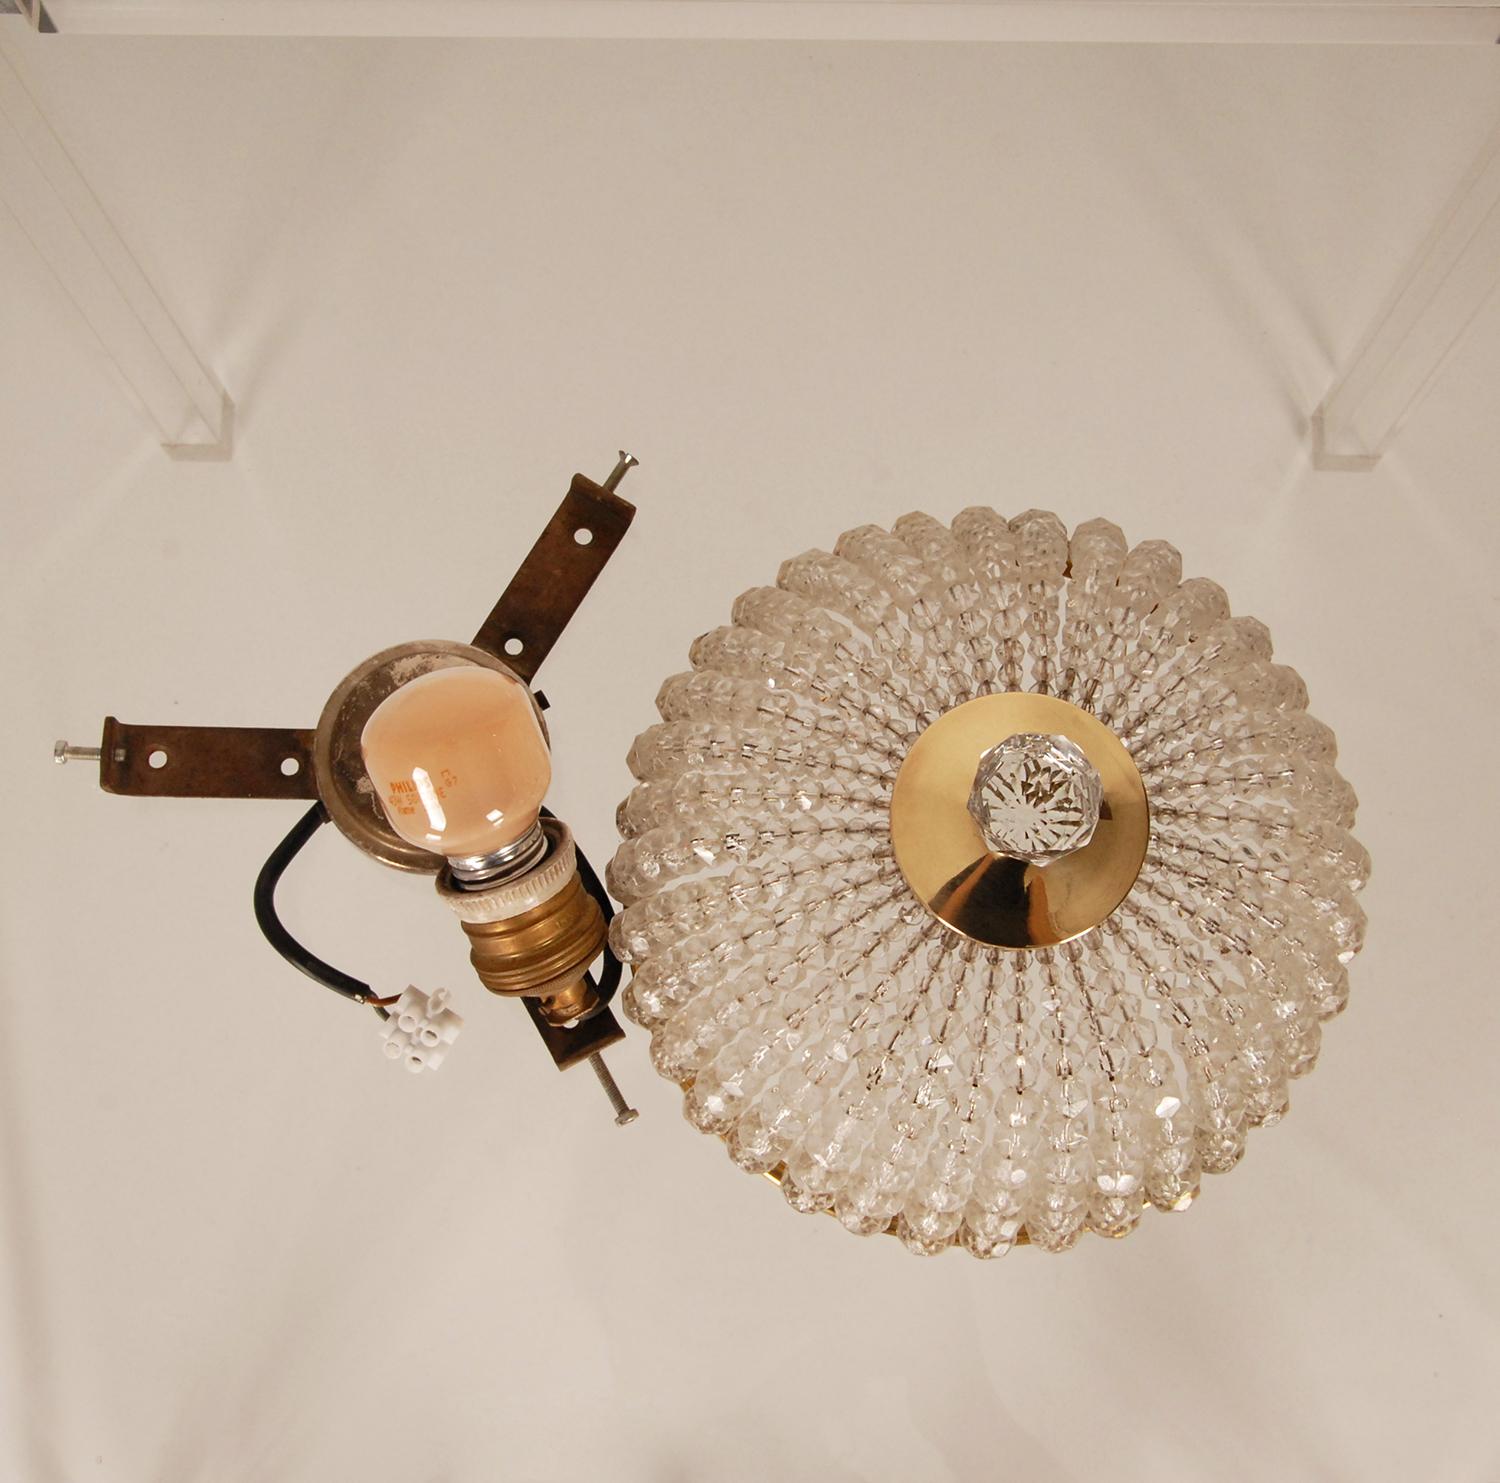 Art deco crystal and gold gilt brass flush mount ceiling fixture.
Crystal strands that converge into a rosette with cut crystal pendant finial in the gilt brass base
The crystal strands are original and woven on thick brass wires. 
Small flush mount